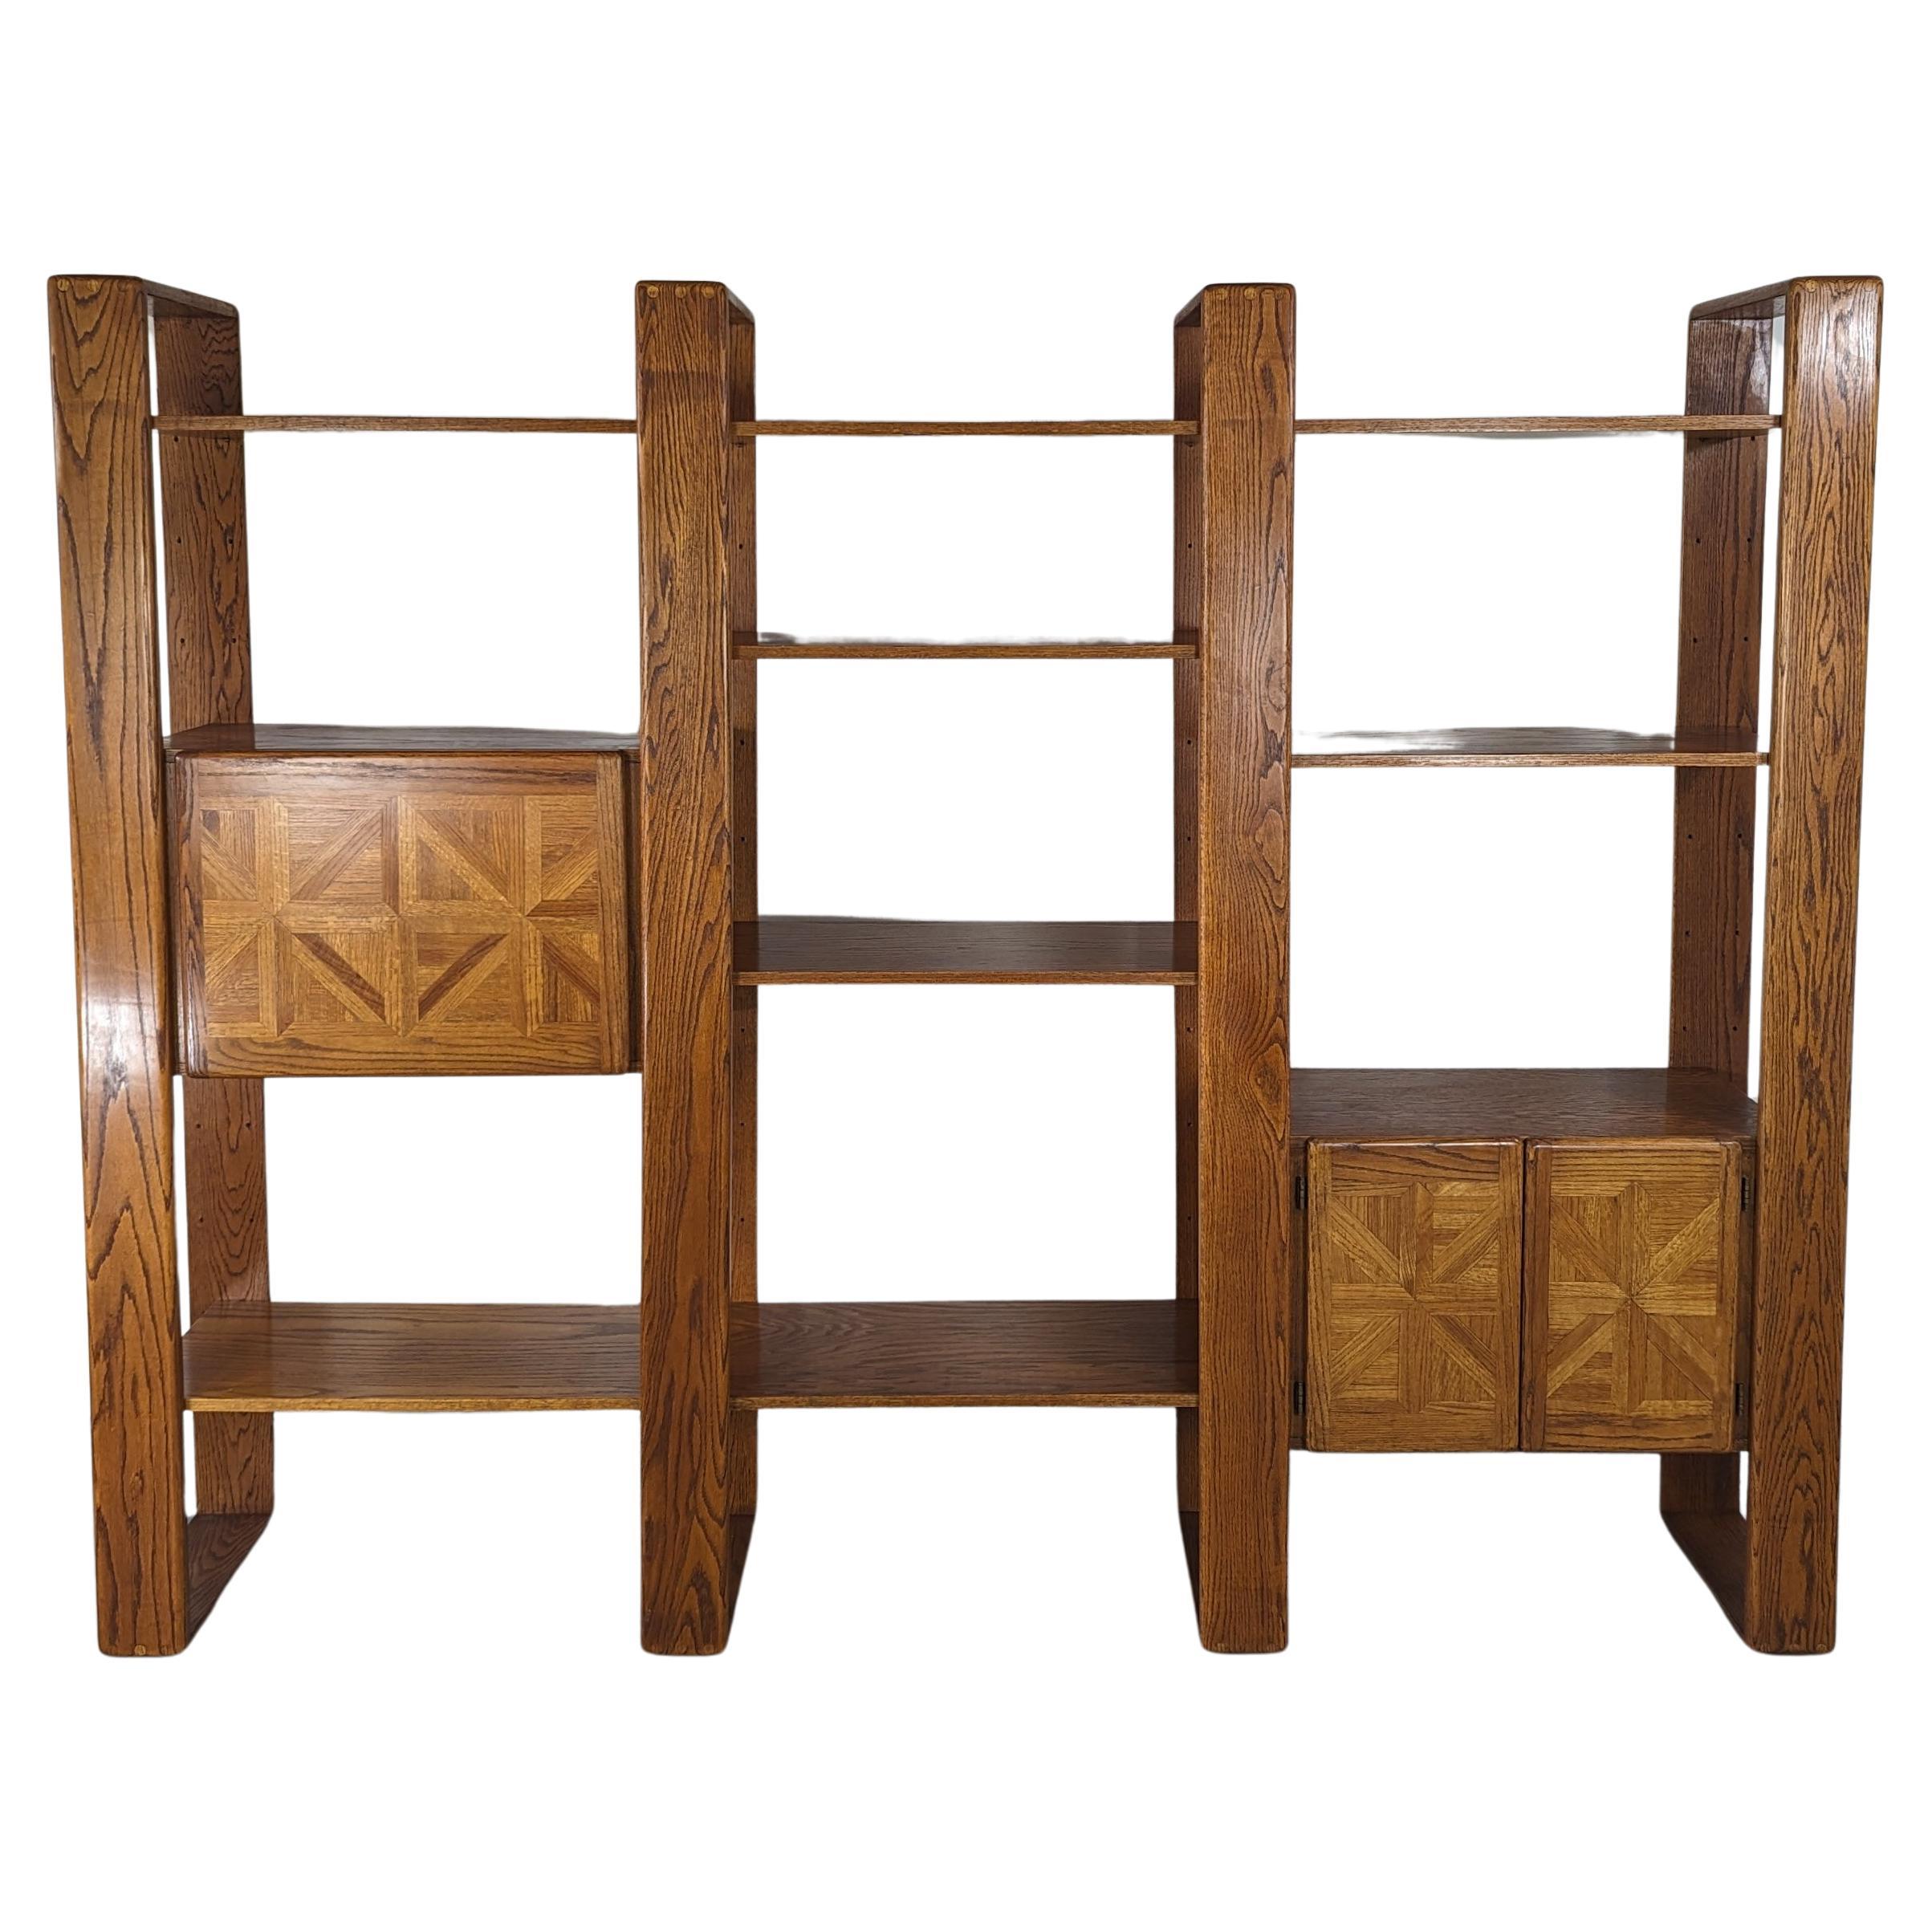 Cerused Oak Modular Wall Unit Shelving or Room Divider by Lou Hodges, c1970s